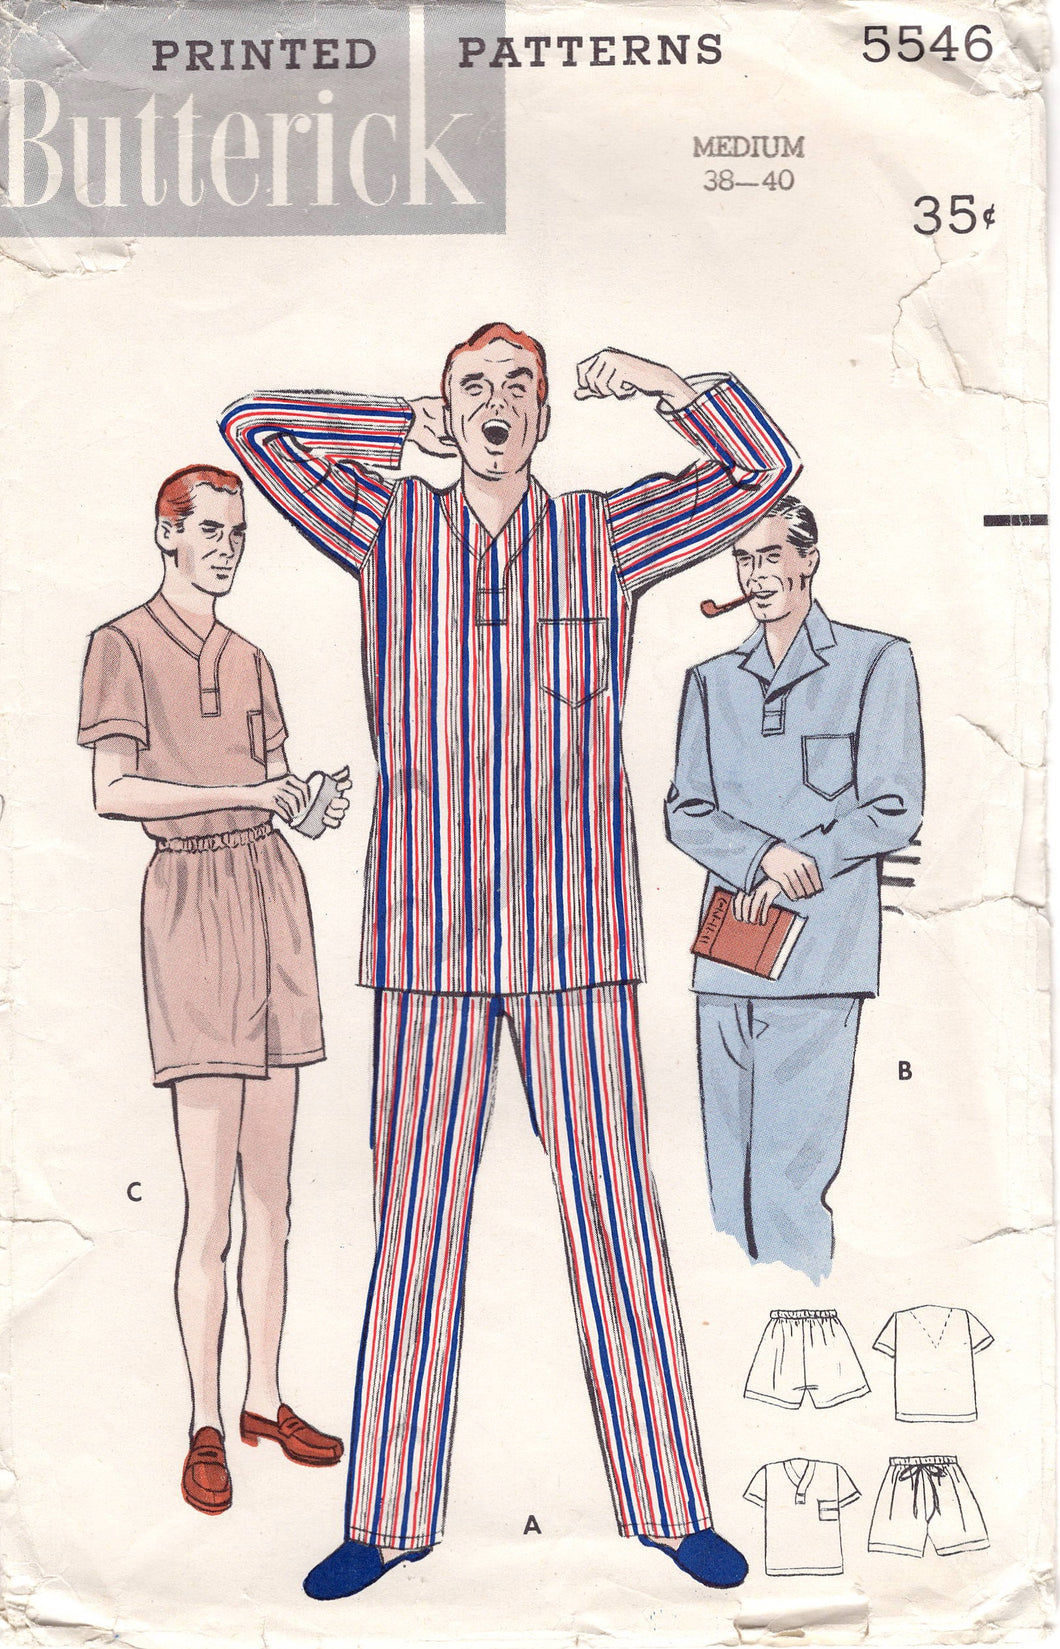 1950's Butterick Men's Pajama pattern with long pants or shorts - Chest 38-40